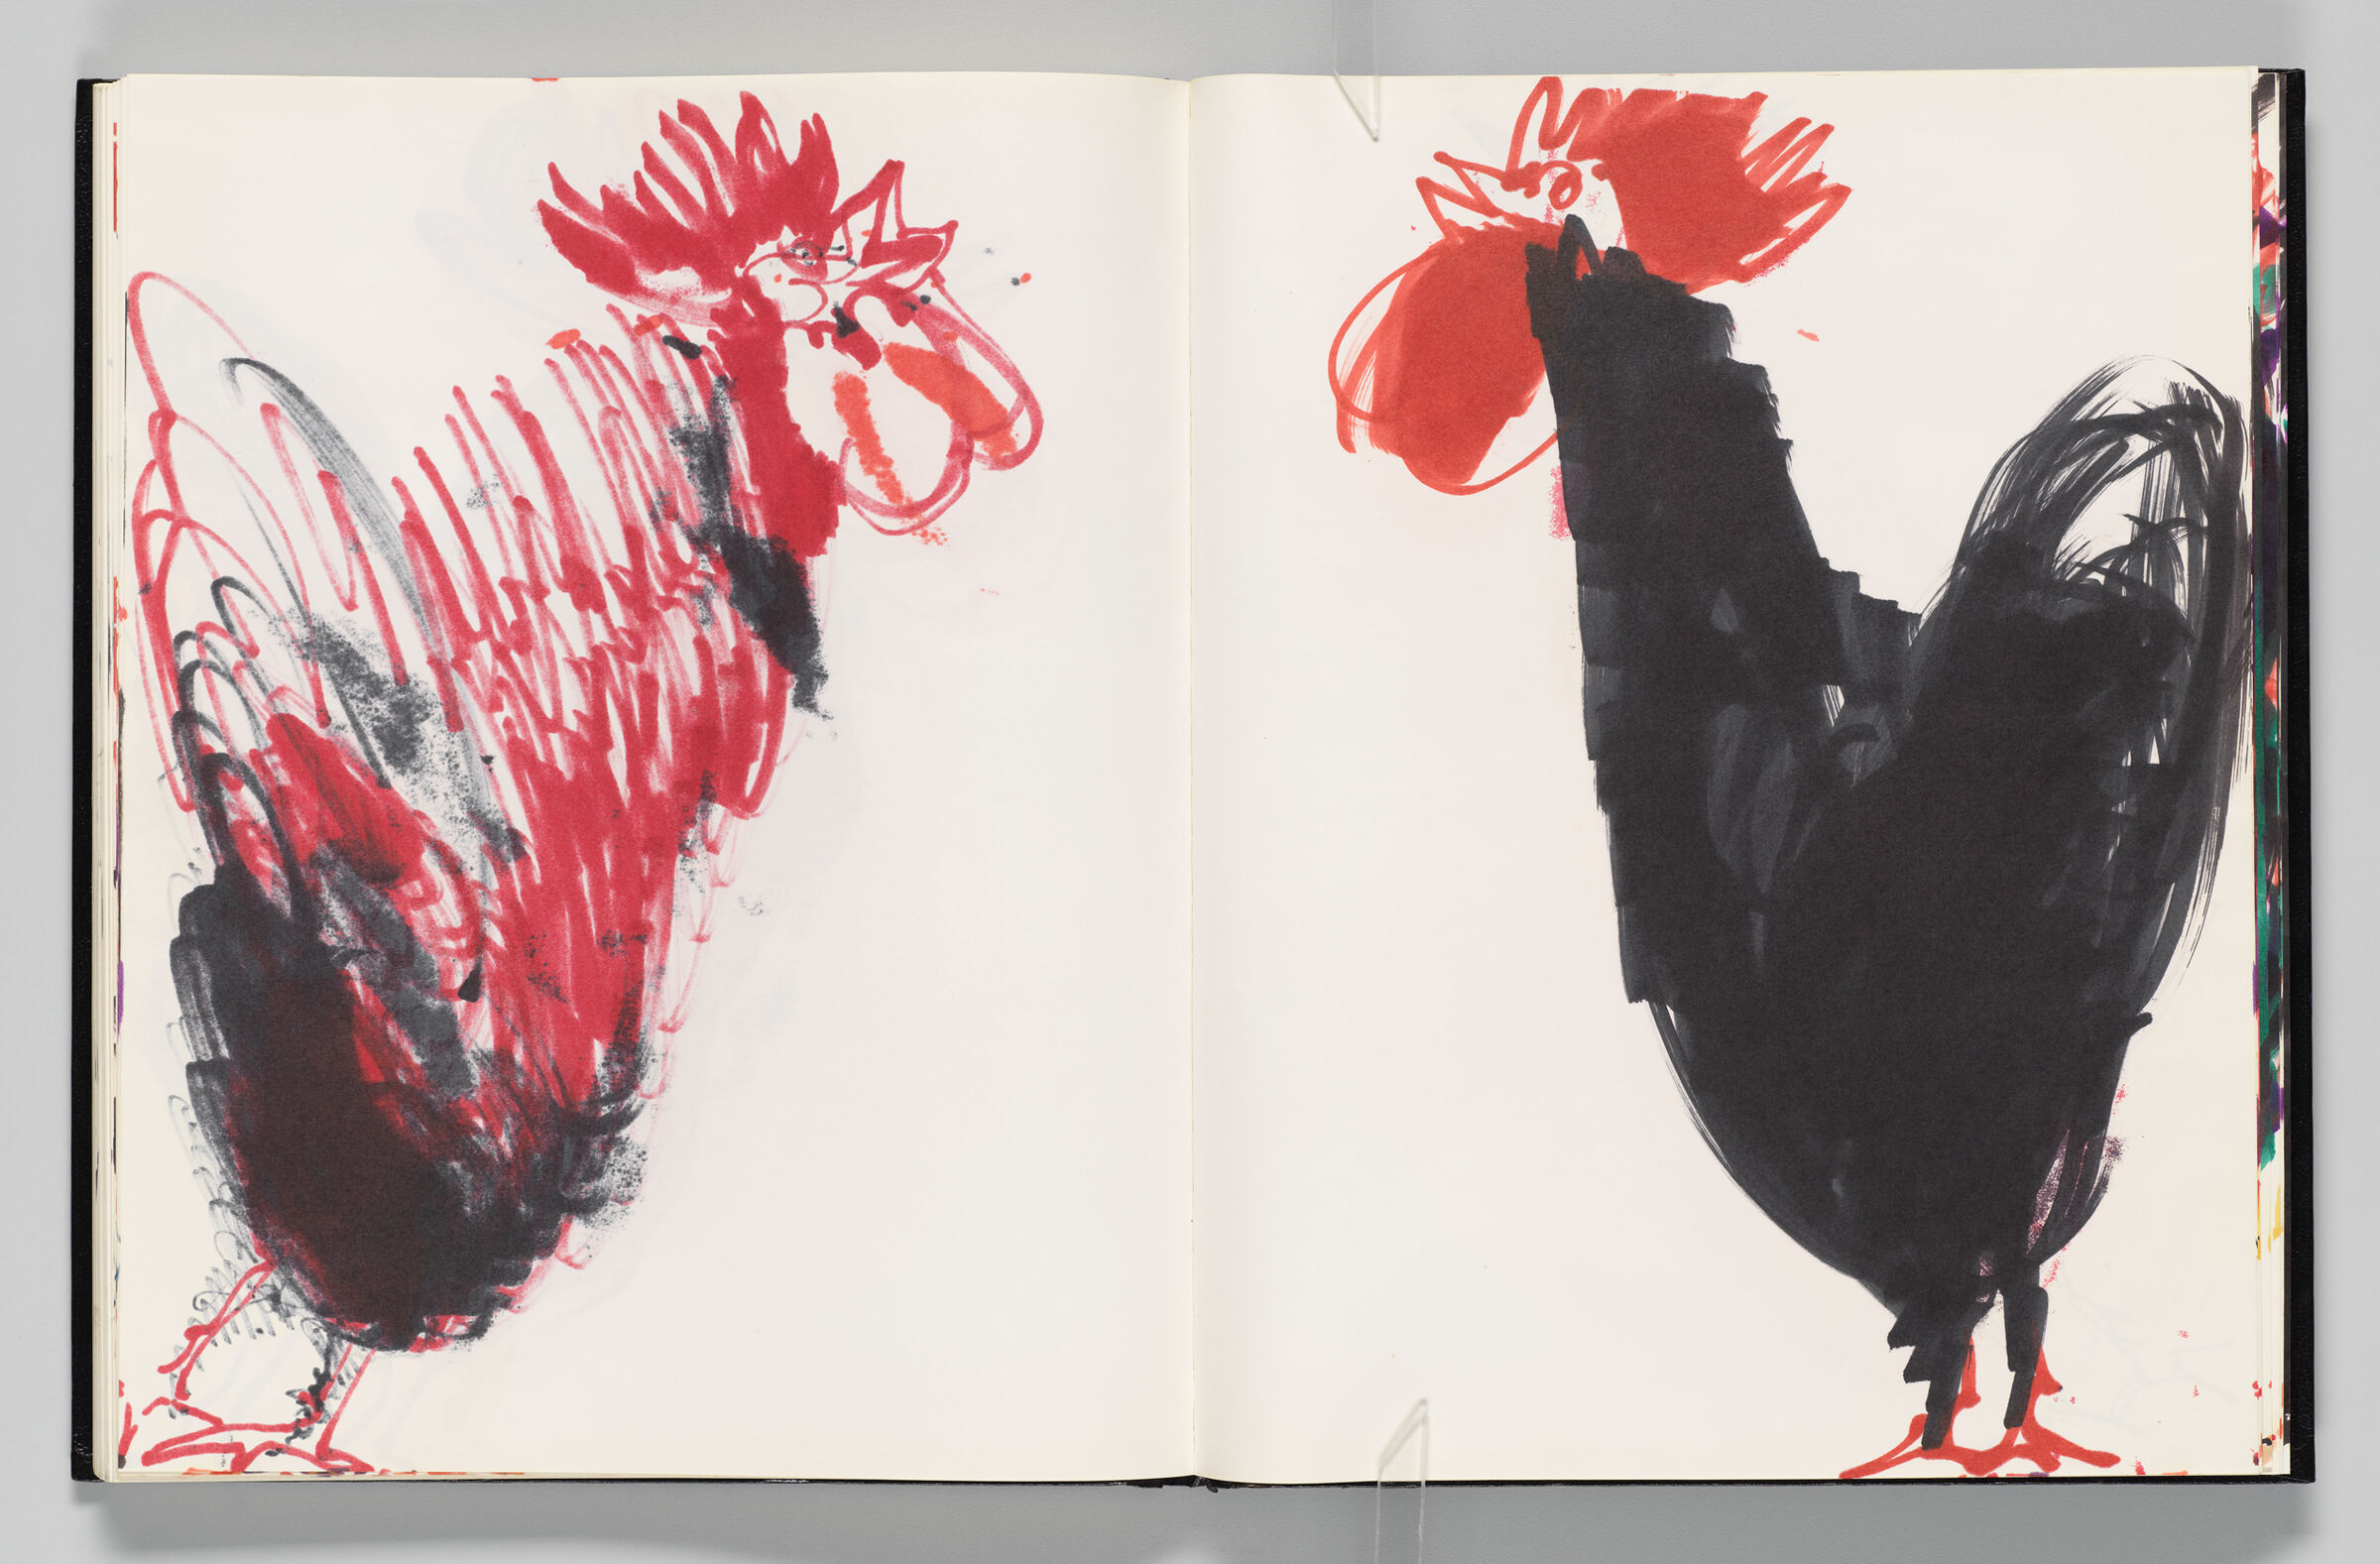 Untitled (Bleed-Through Of Previous Page And Color Transfer, Left Page); Untitled (Rooster, Right Page)